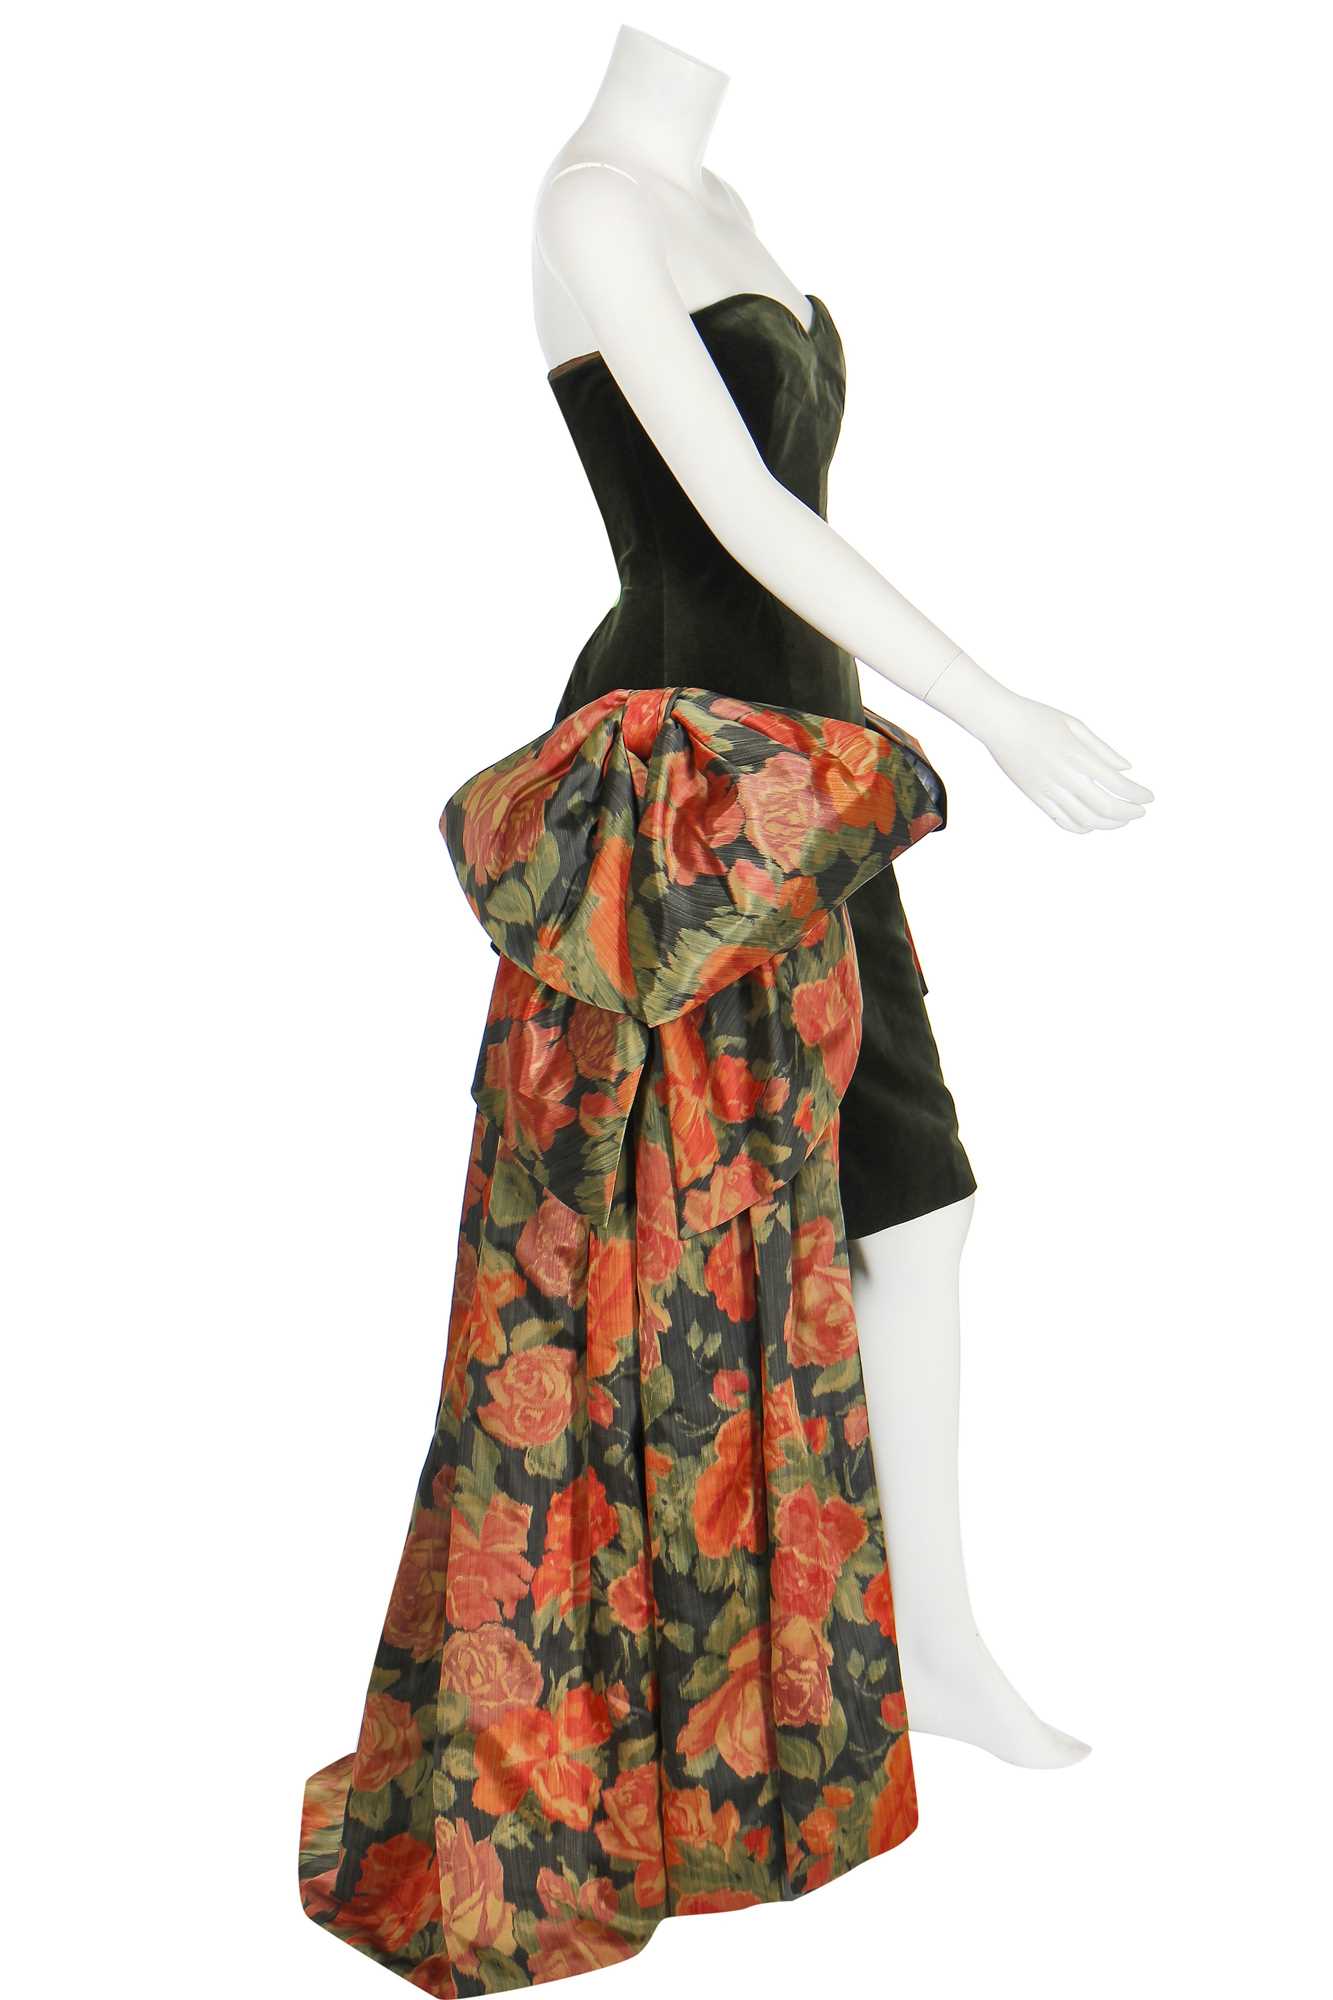 Lot 132 - A Gina Fratini velvet cocktail dress with trained chiné taffeta bows to hips, 1988-89